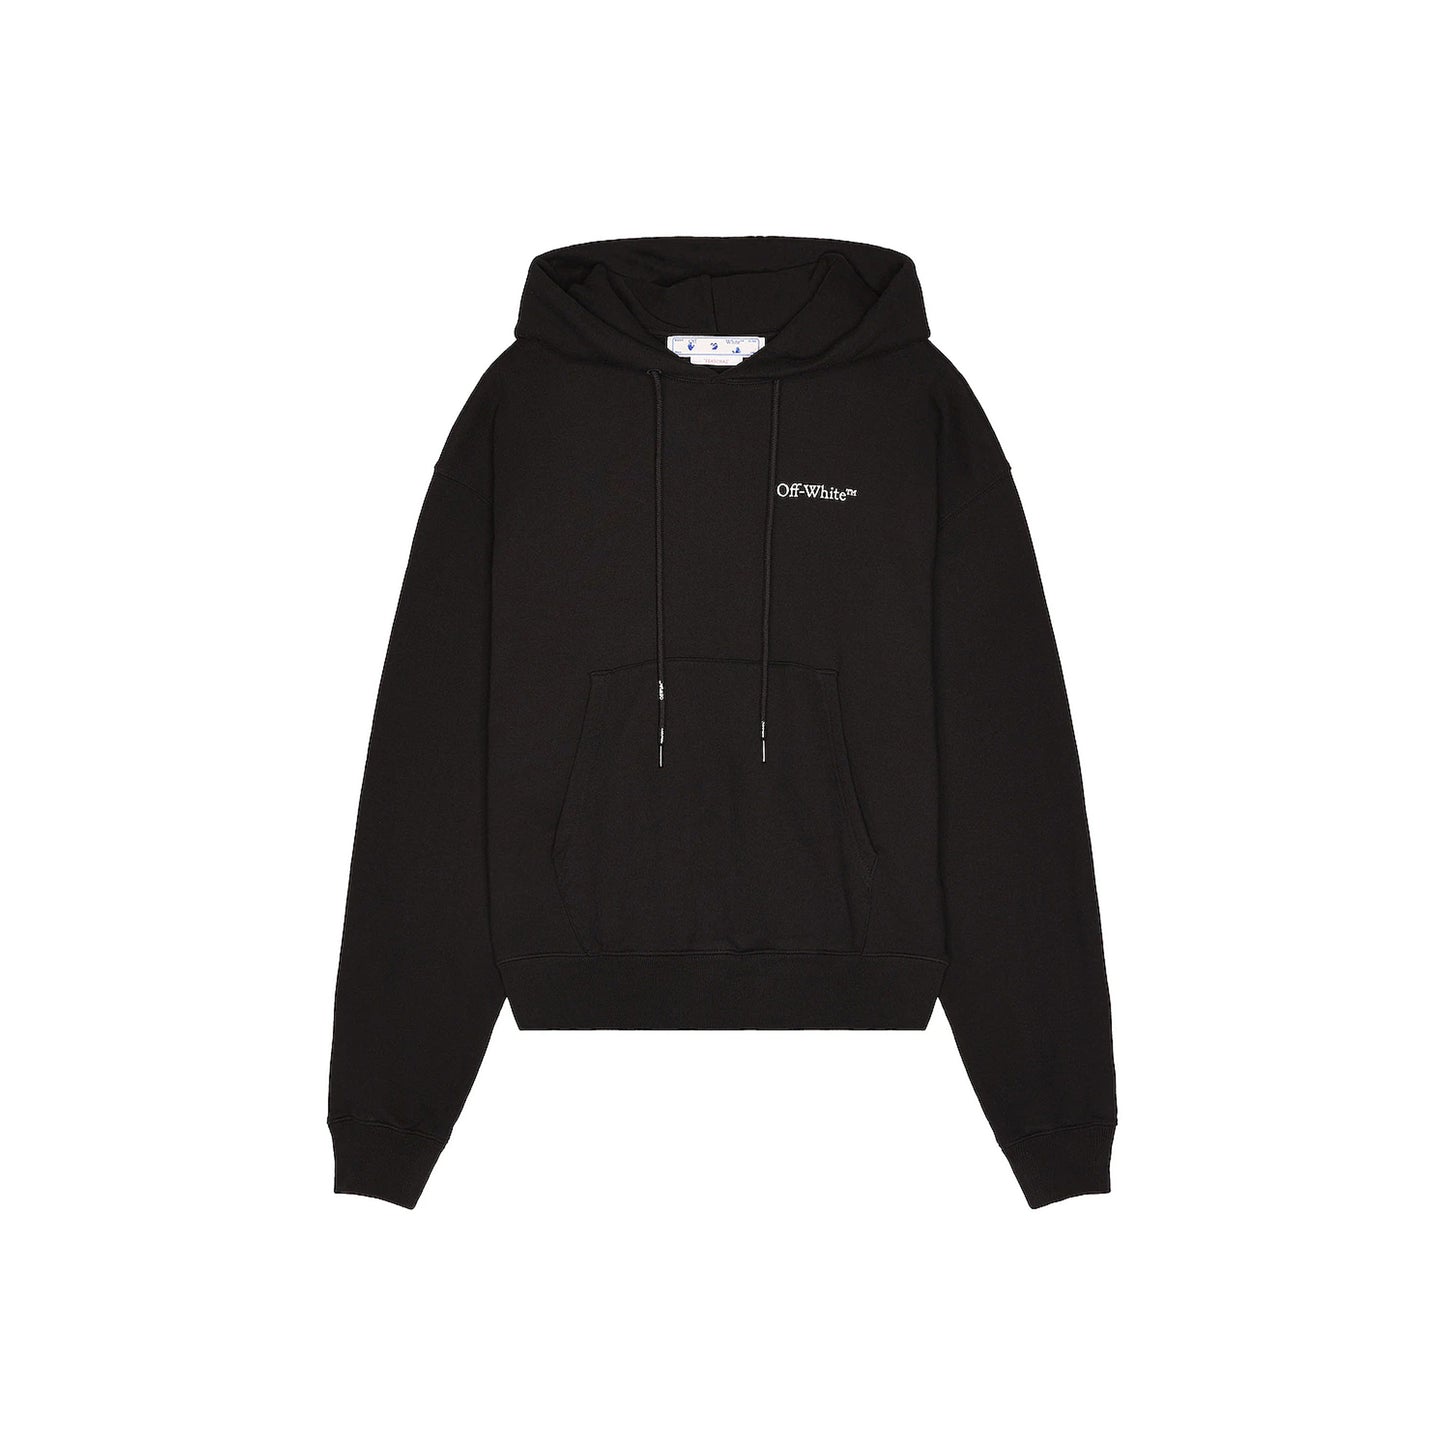 Off-White Caravaggio Crowning Oversize Hoodie Black